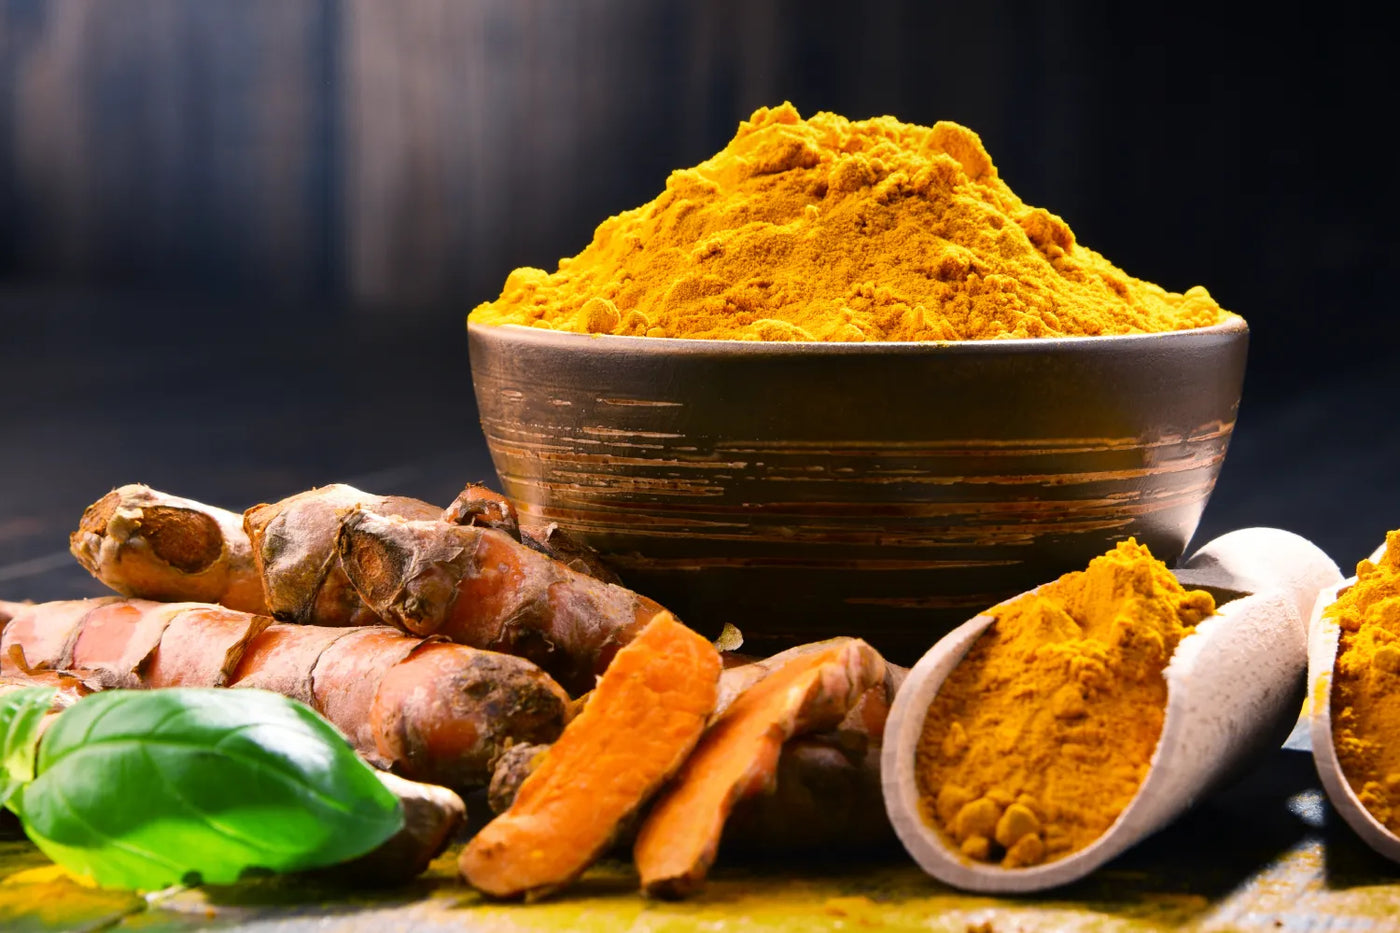 How Long Does Turmeric Take To Work?